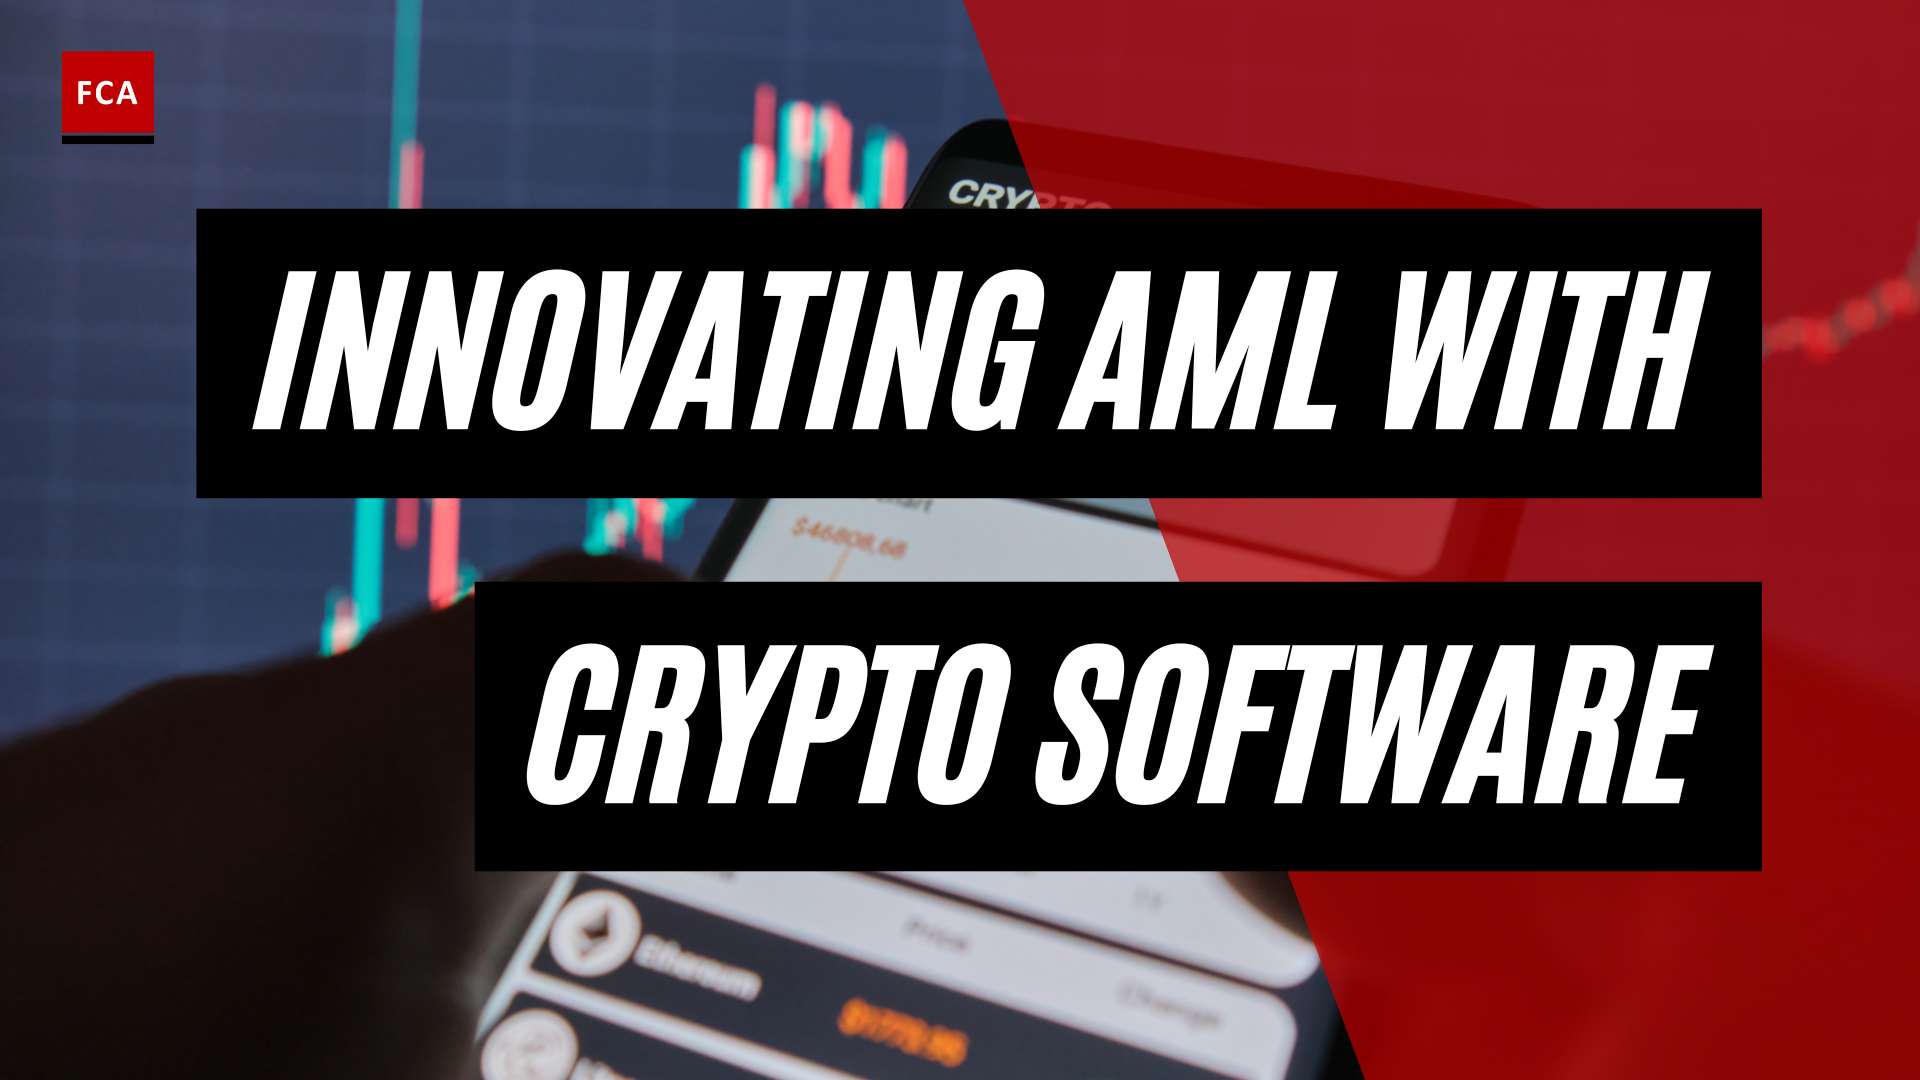 Embracing Innovation: Enhancing Aml Efforts With Cryptocurrency Software